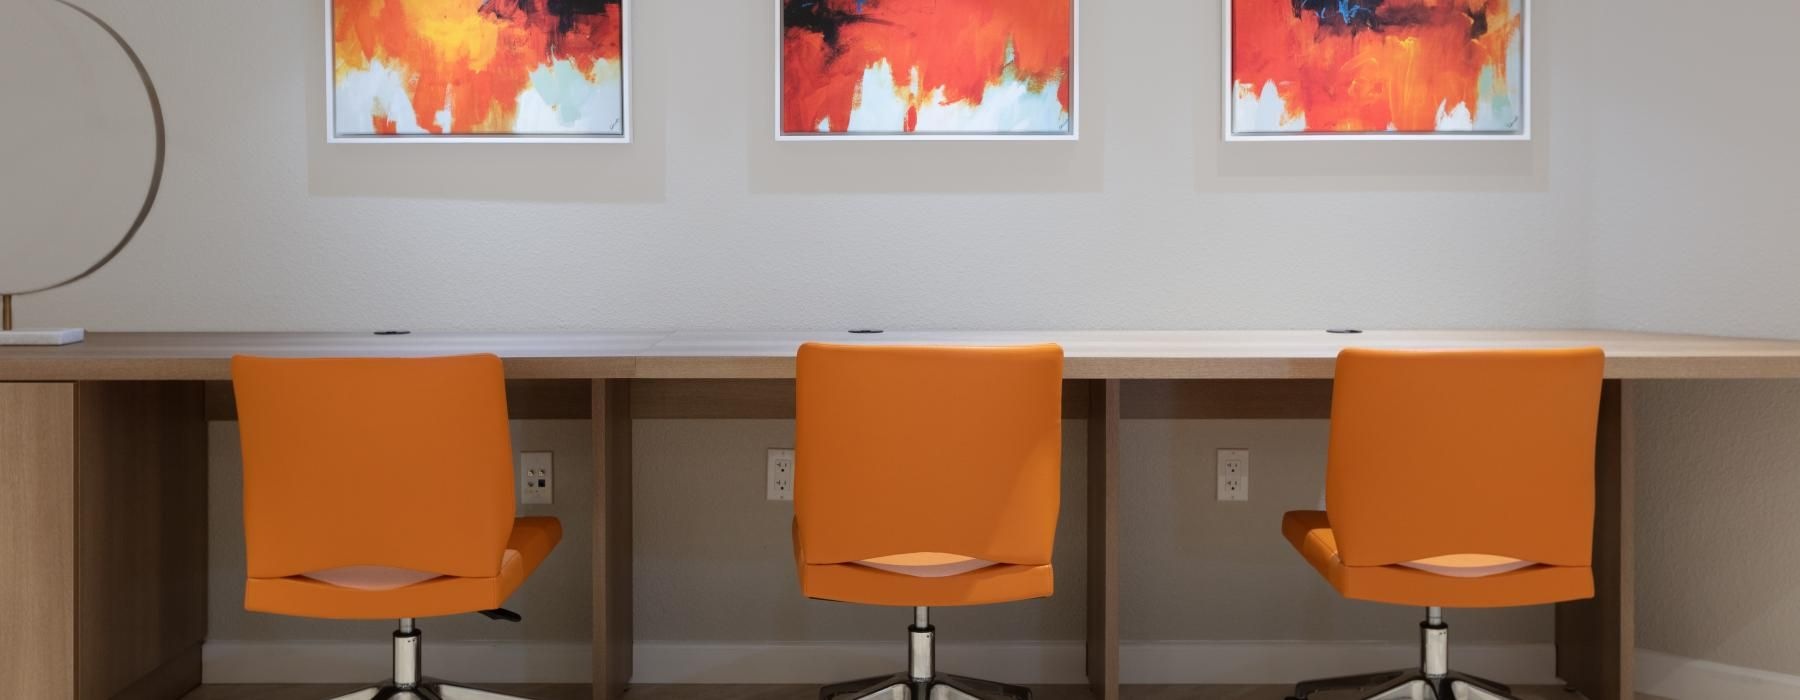 a group of orange chairs in a room with a desk and a wall with art on it